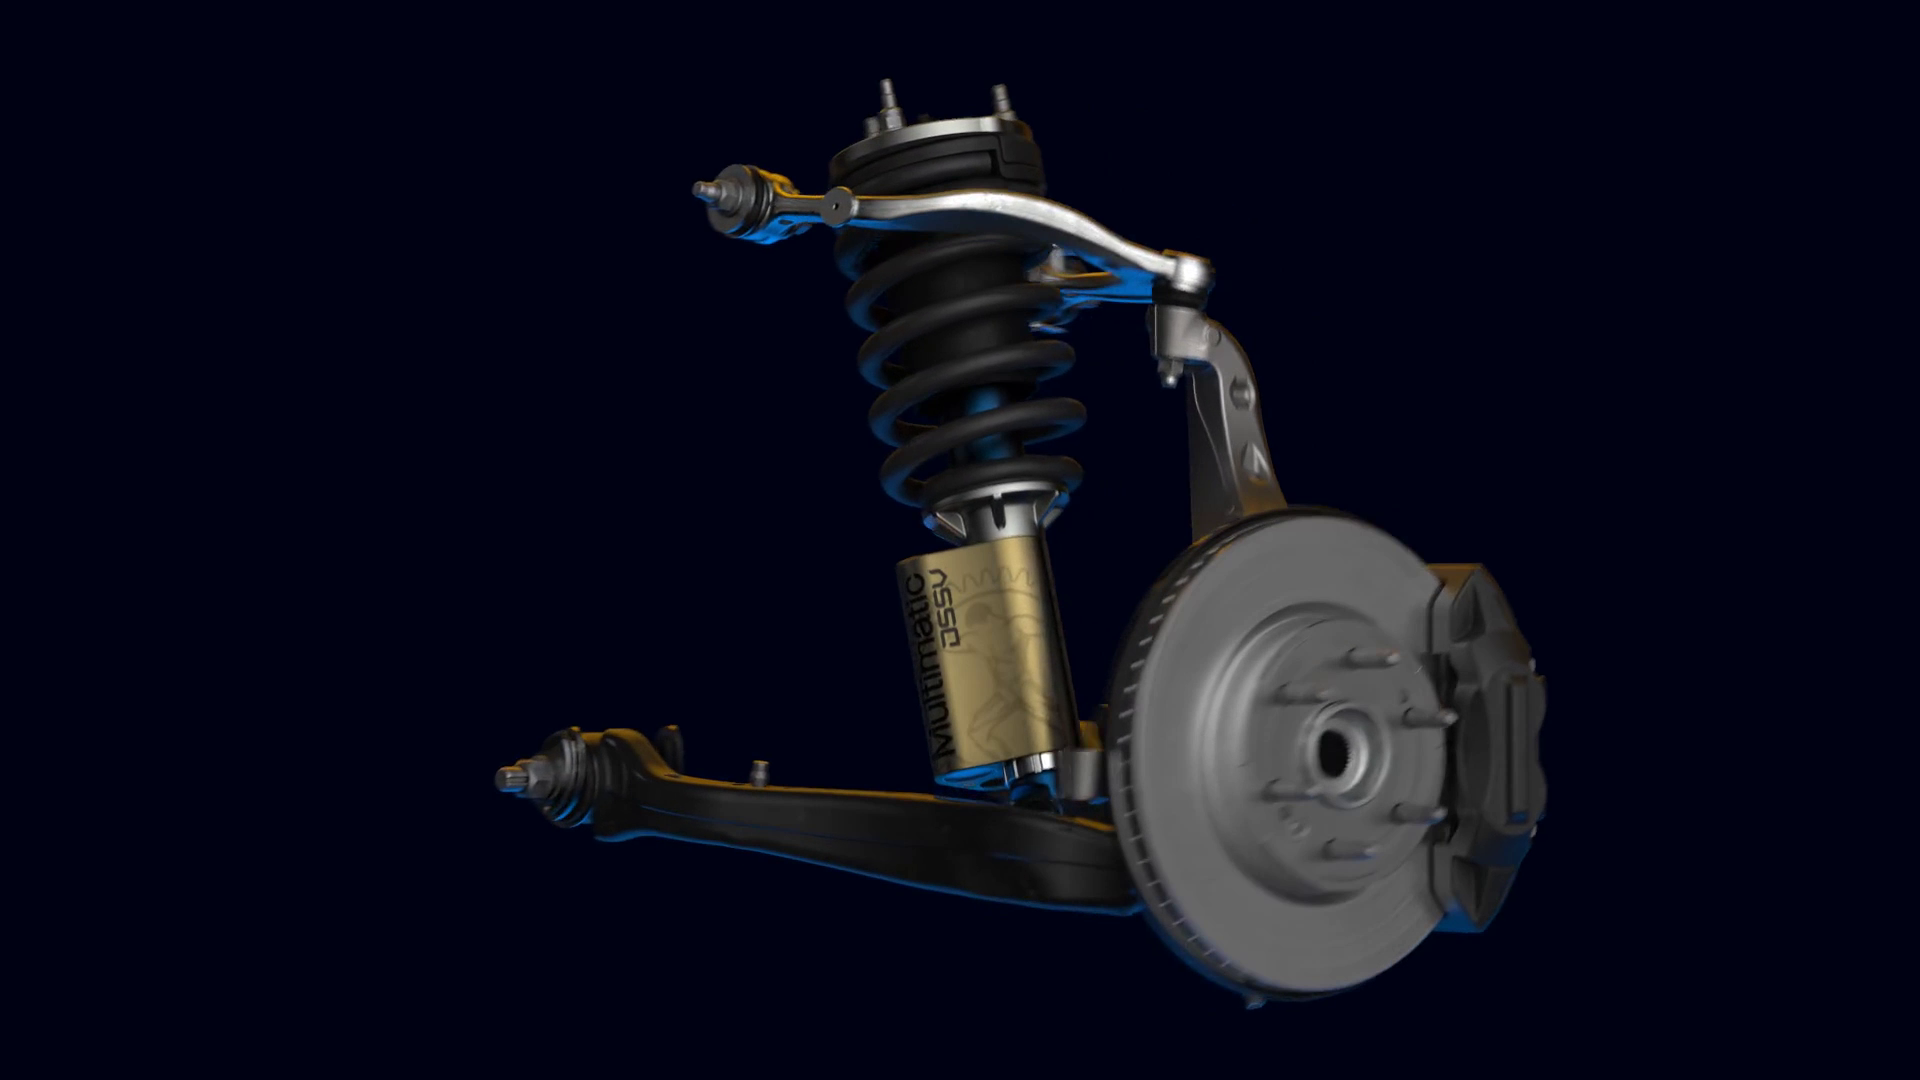 Multimatic DSSV dampers and suspension components for GM's T1XX Truck Platform